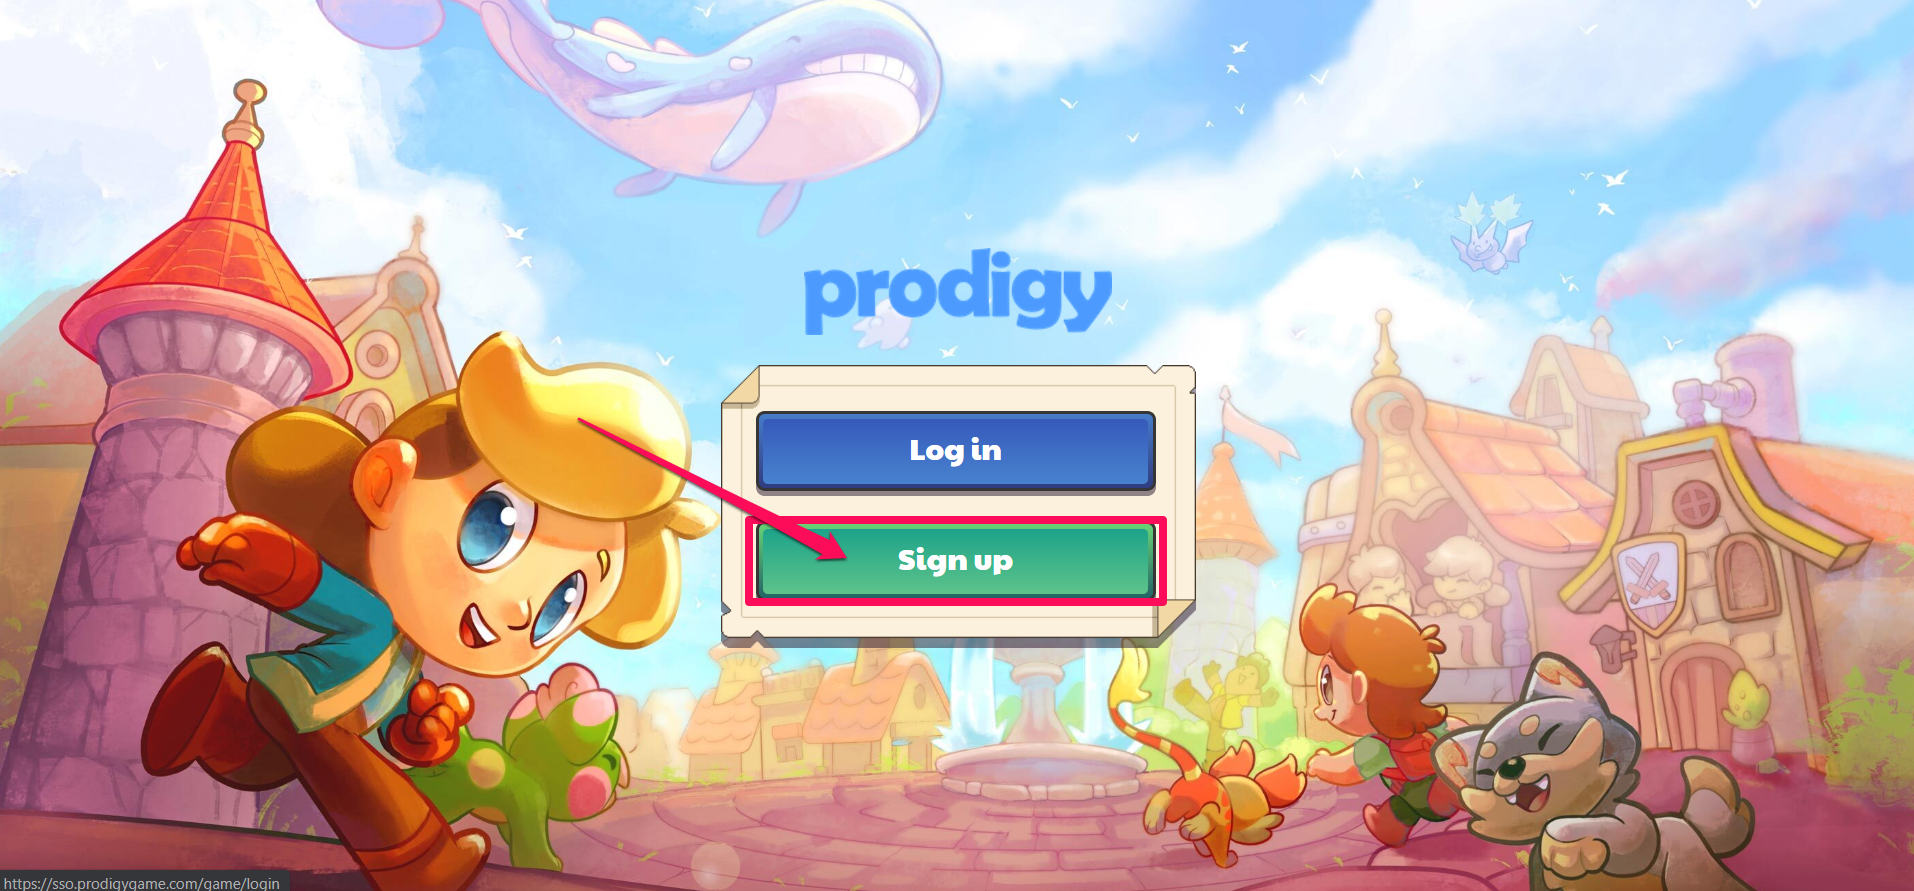 prodigy membership sign in